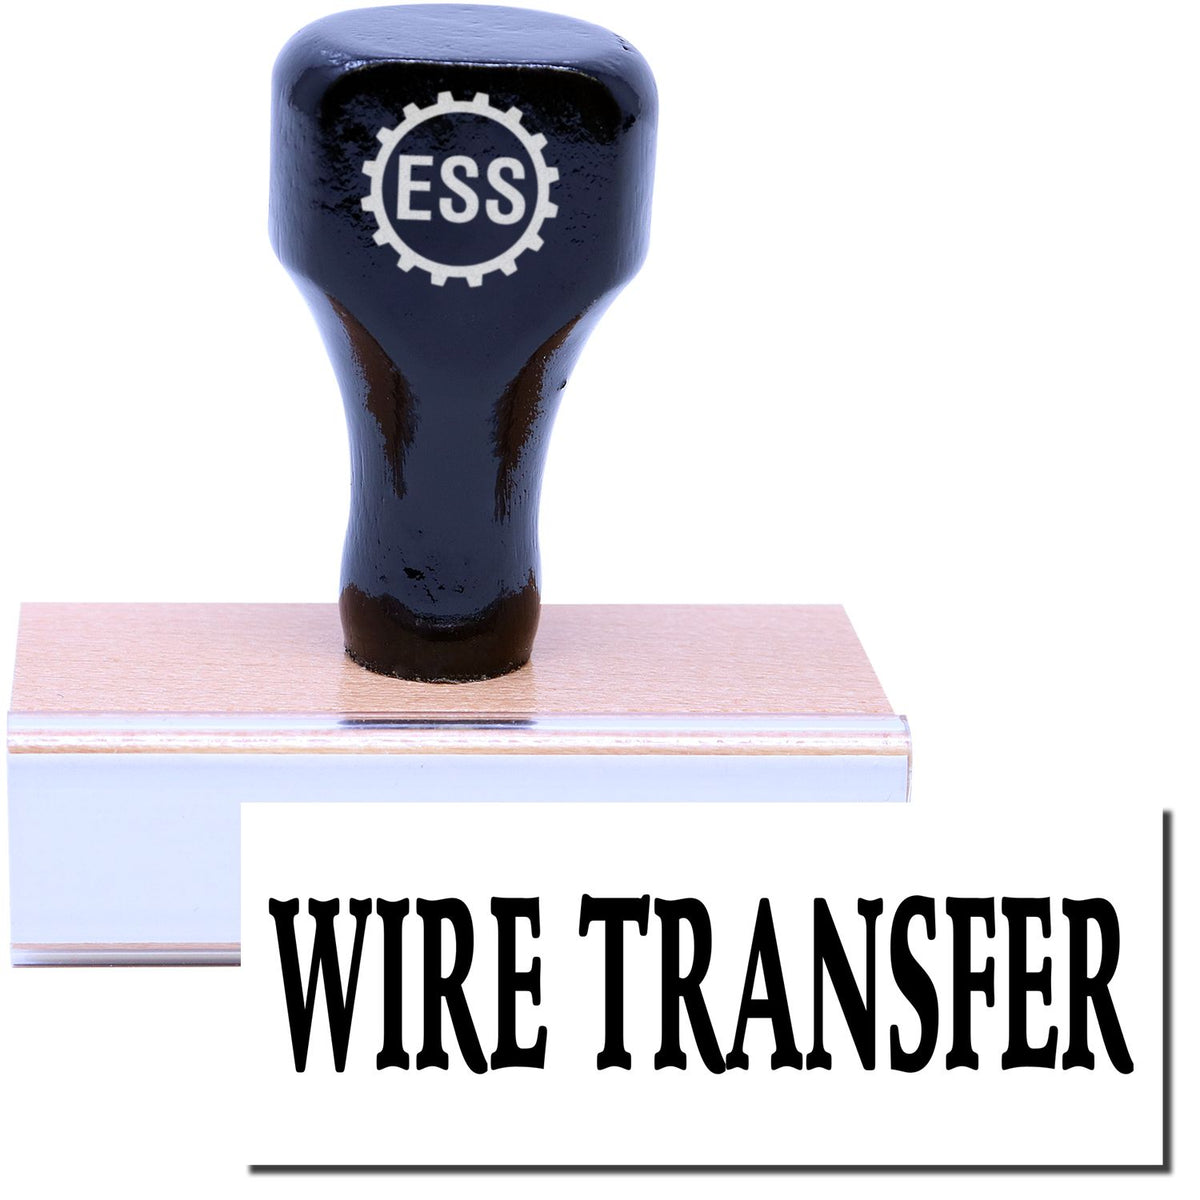 A stock office rubber stamp with a stamped image showing how the text &quot;WIRE TRANSFER&quot; is displayed after stamping.